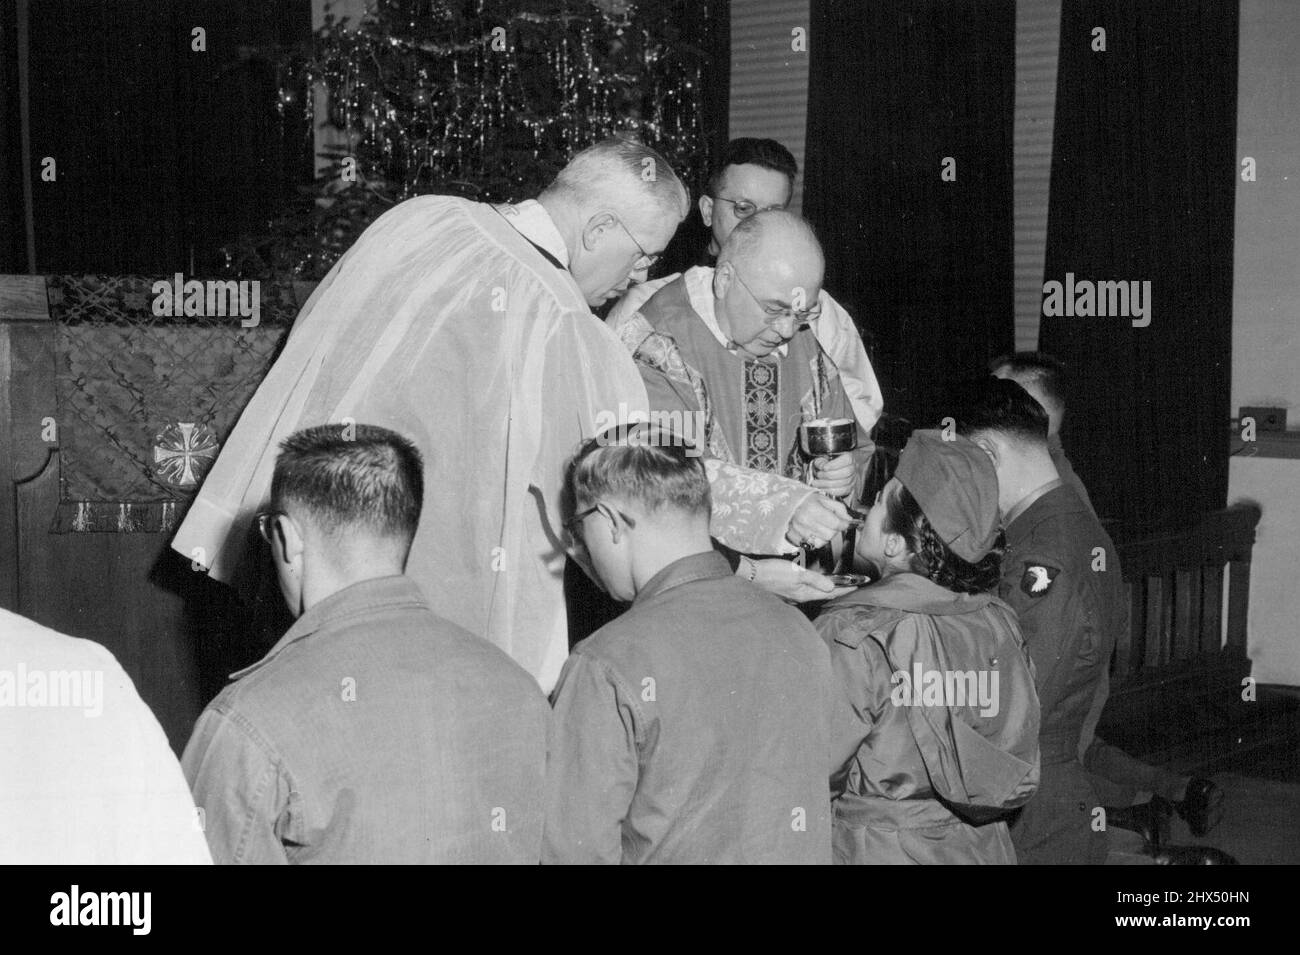 Lt. Pamela Robinson Opelousas, LA (2nd from right) receives holy communion from his eminence Francis Cardinal Spellman during mass celebration at the finance building Chapel, Tokyo, Japan. January 02, 1953. (Photo by Donald E. Wilson, U.S. Army Photo). Stock Photo